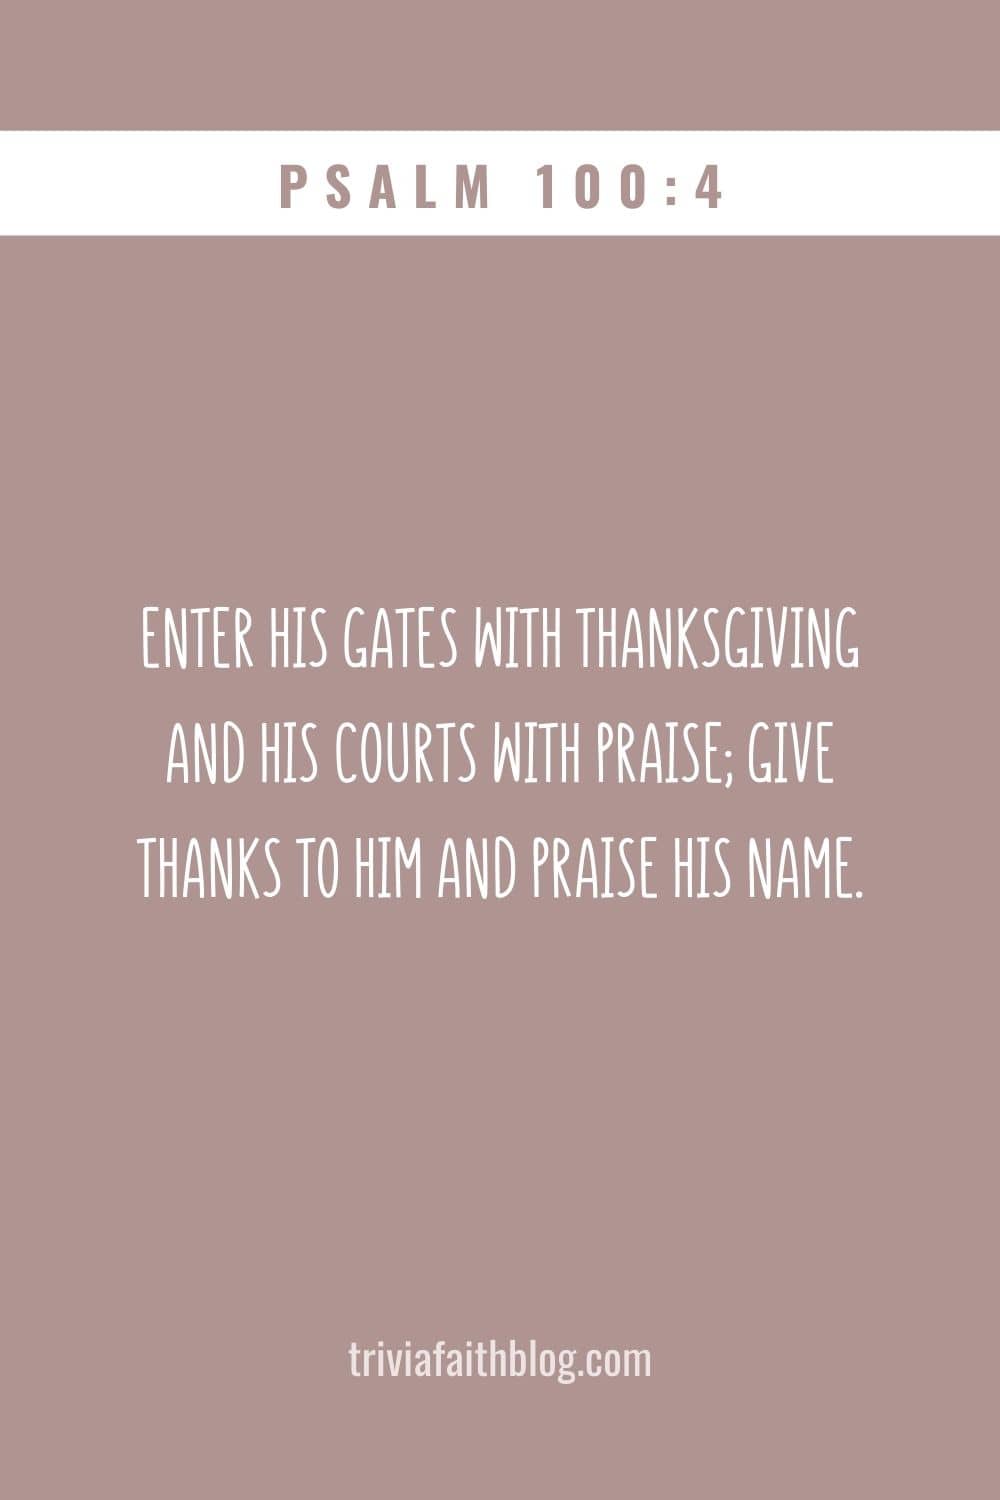 Enter his gates with thanksgiving and his courts with praise; give thanks to him and praise his name